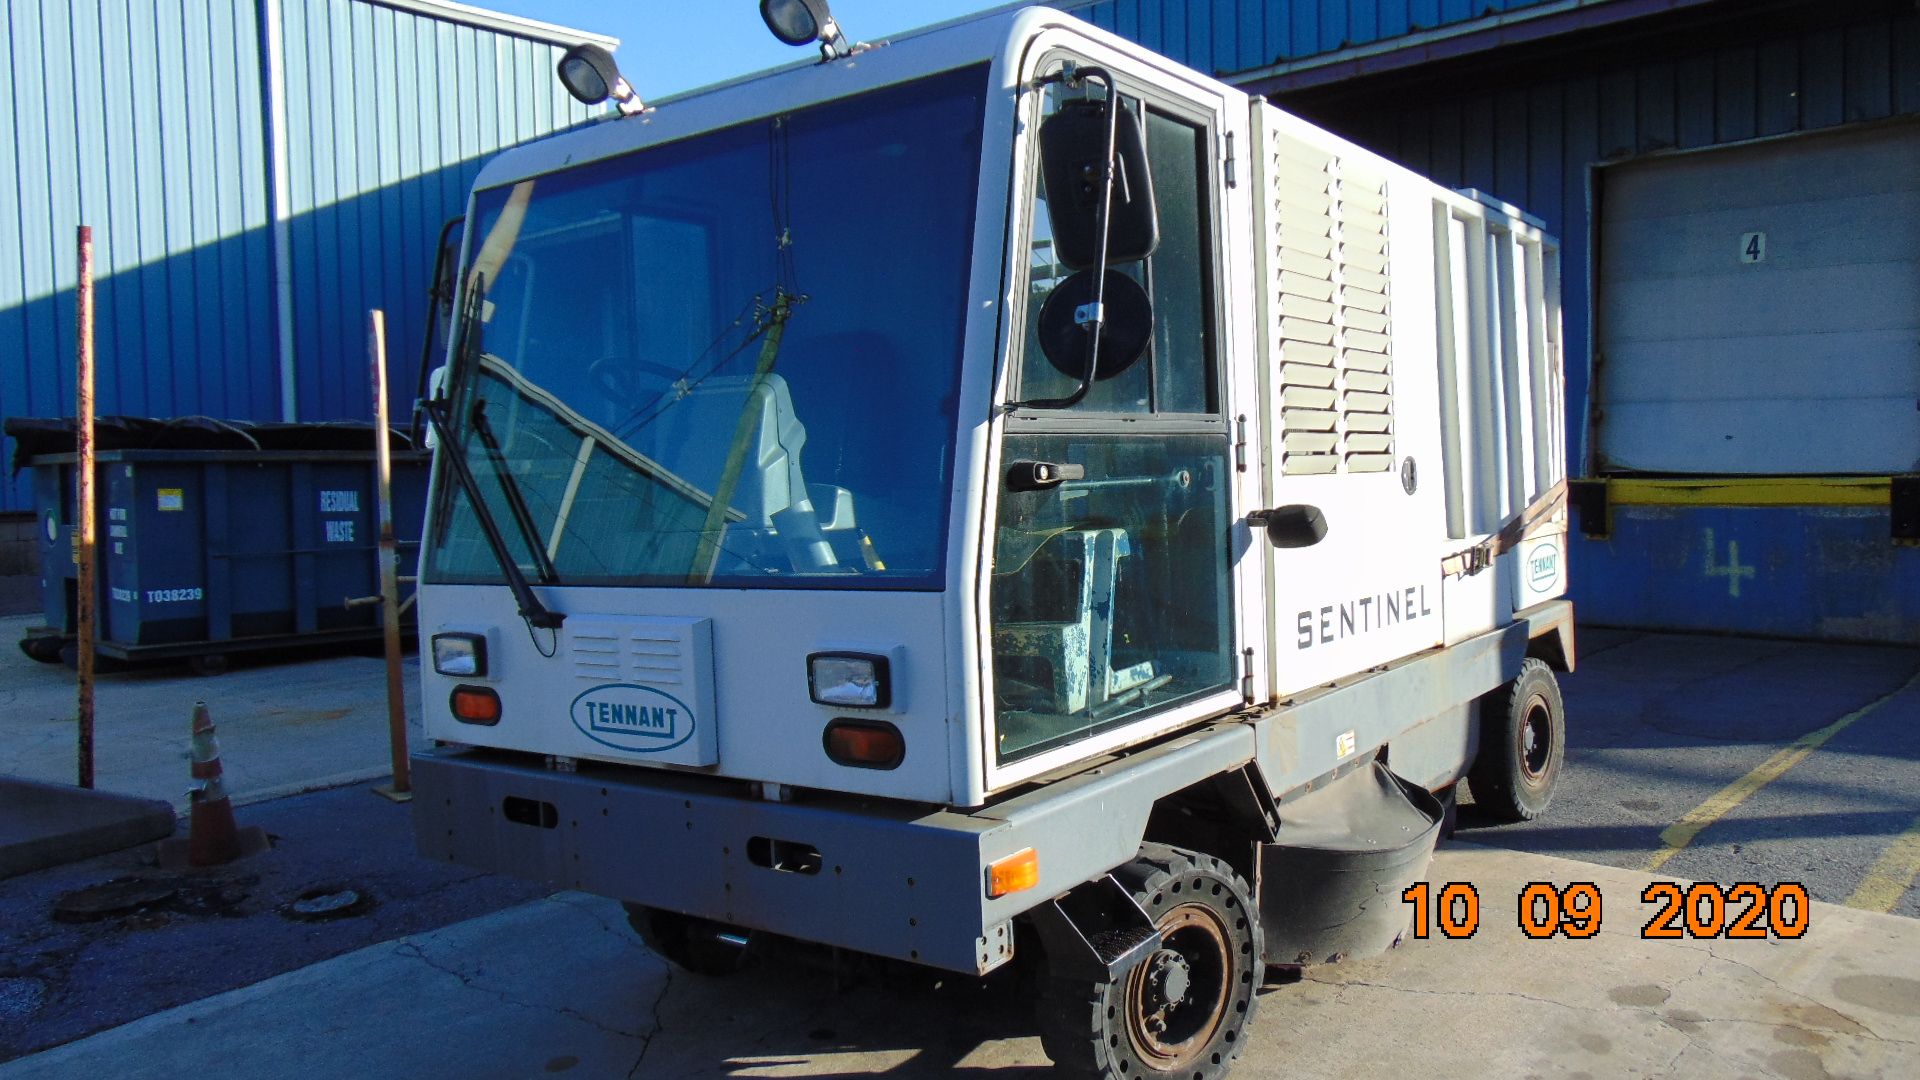 Tennant Sentinel - 9292 Outdoor Ride-On Street Sweeper - Image 3 of 6